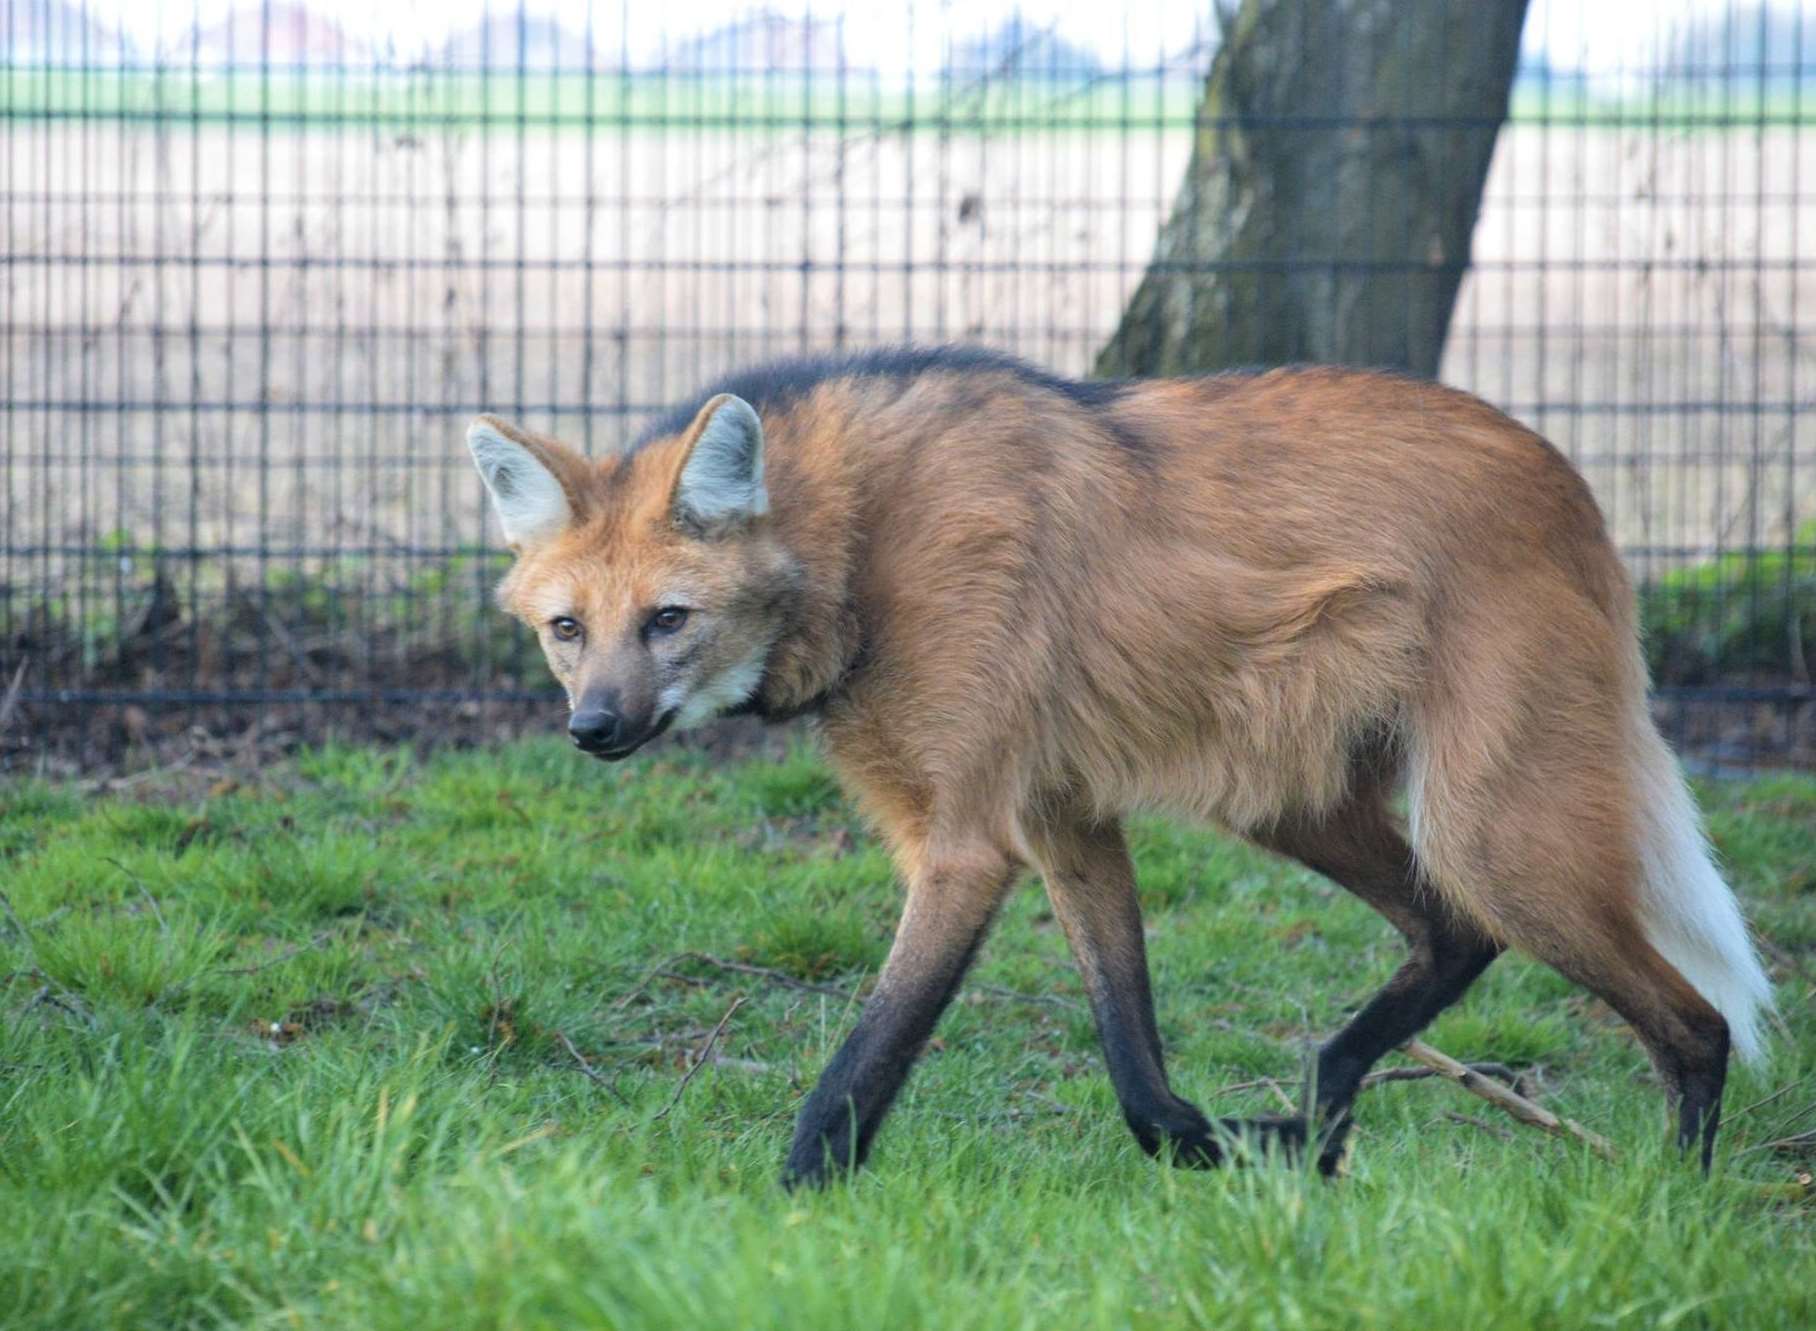 A pair of maned wolves are some of the only animals from the past site that remain there